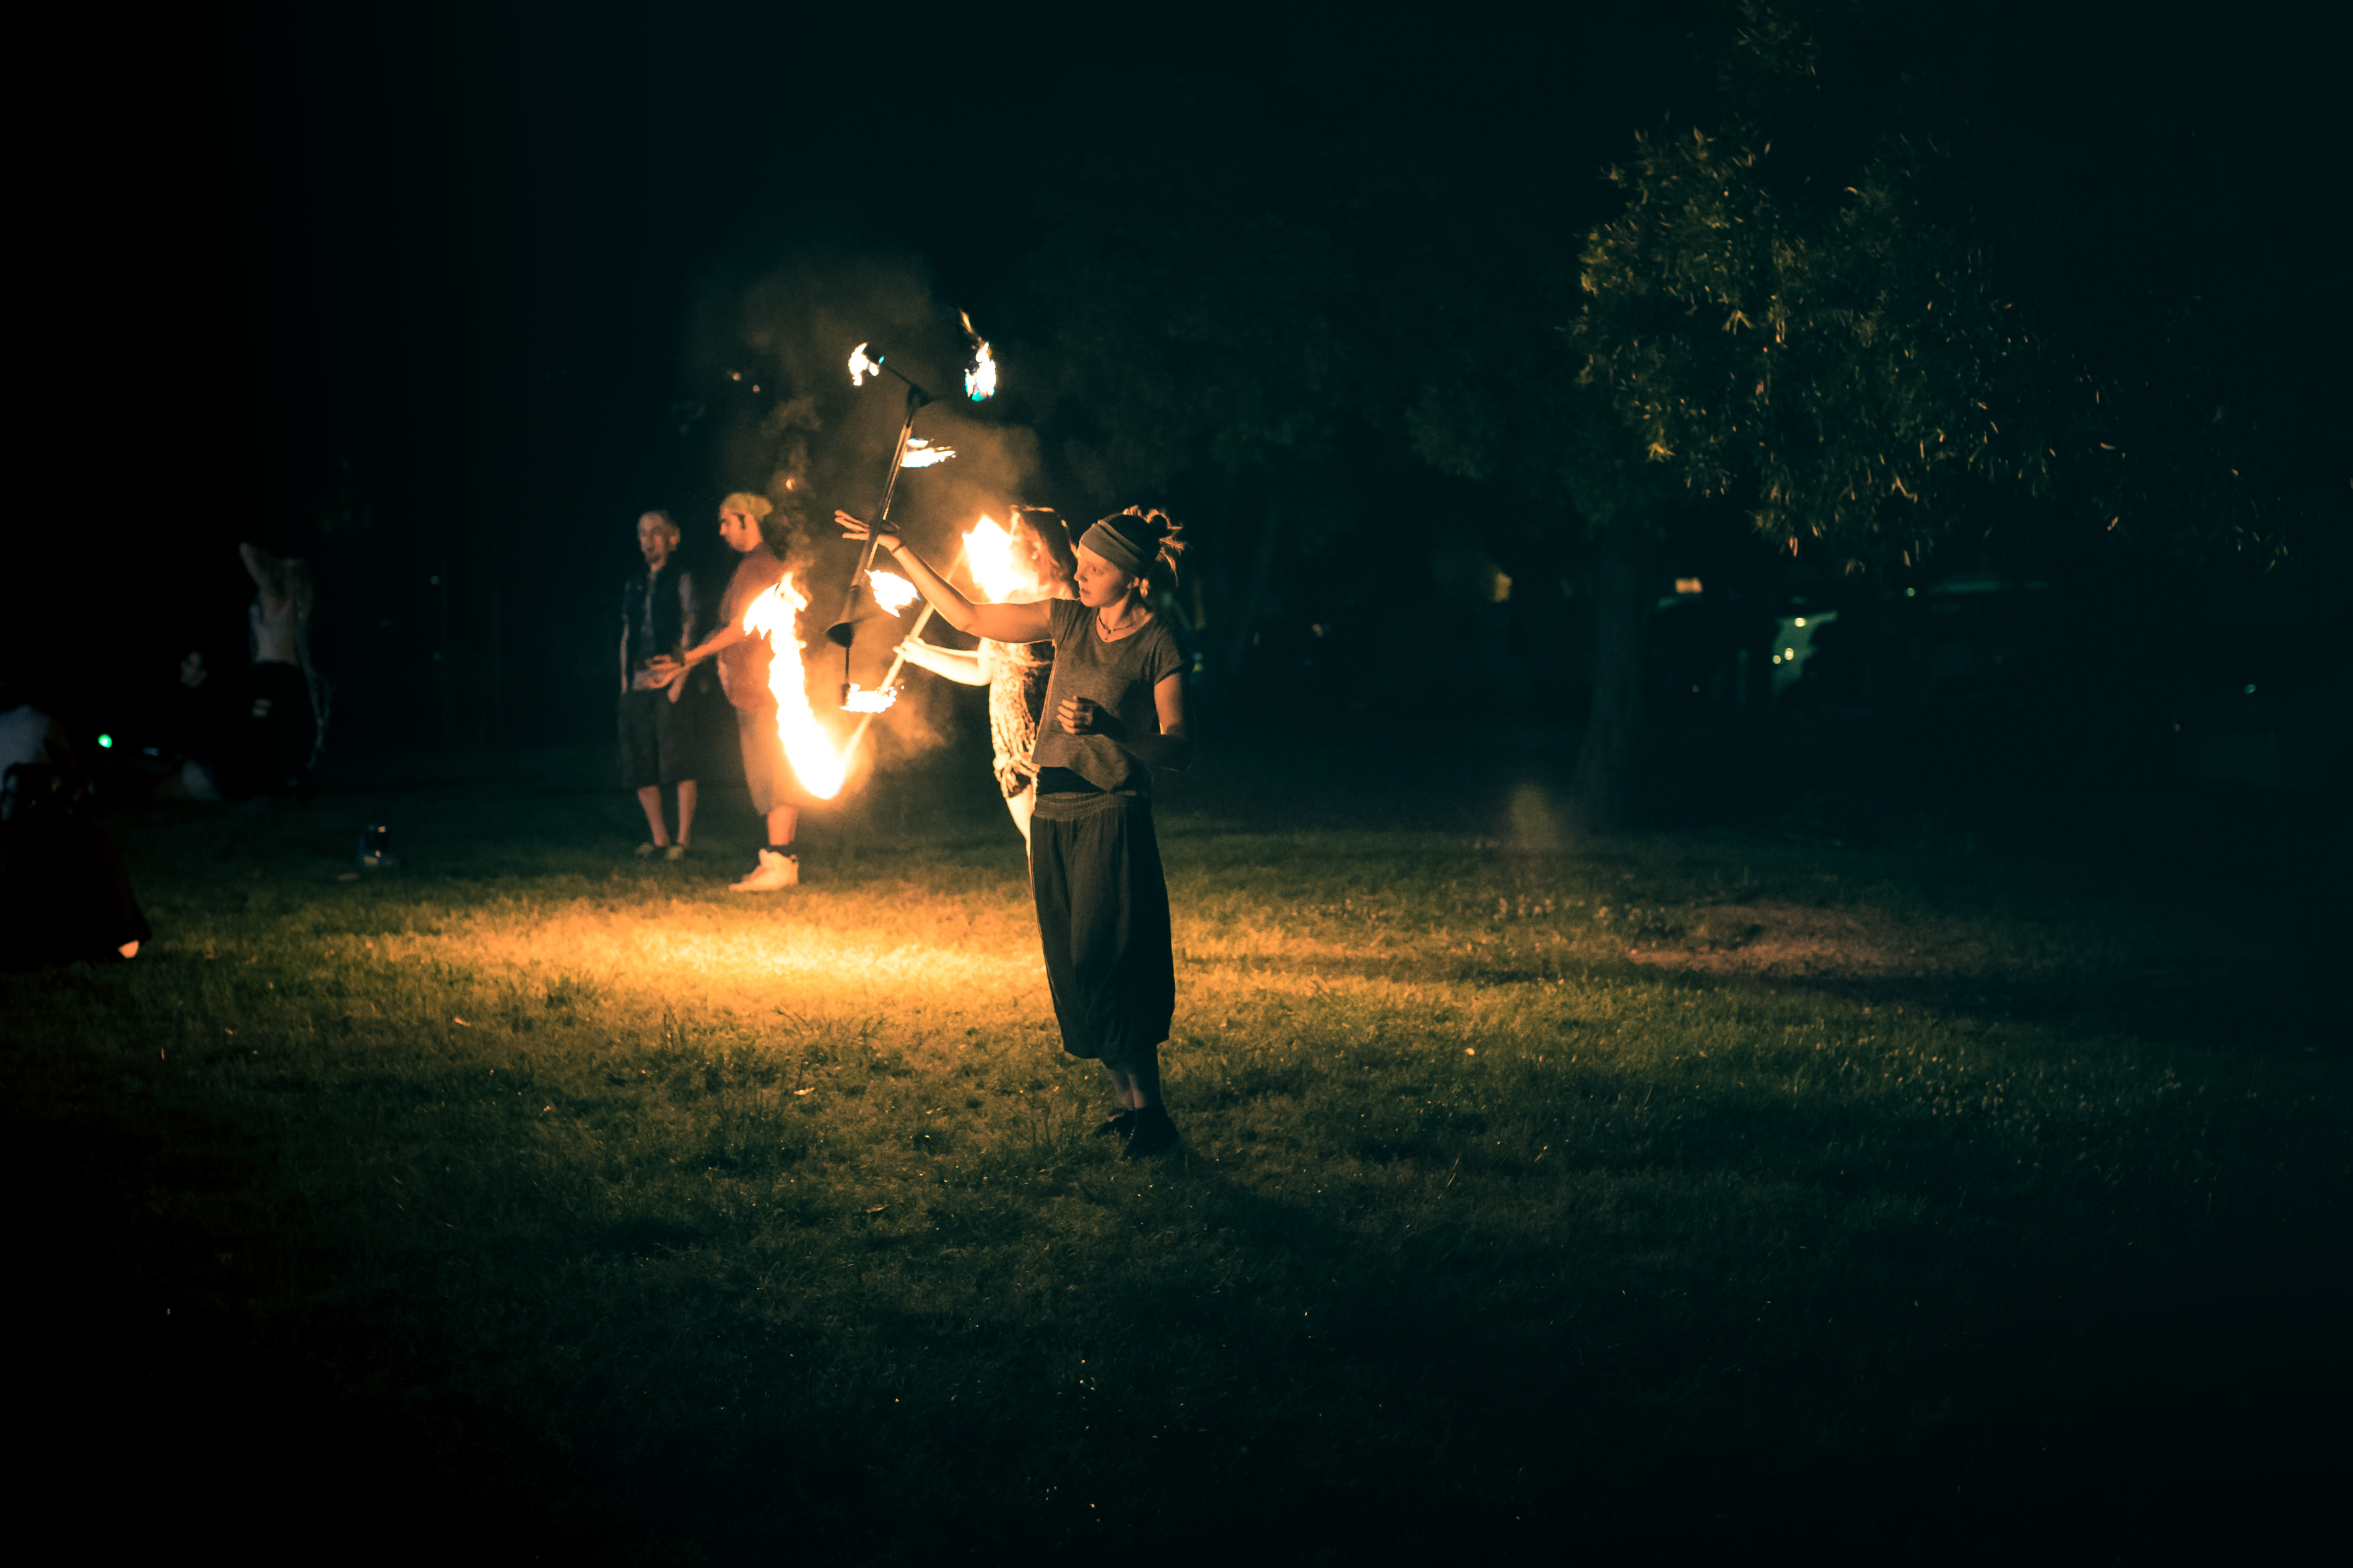 Newtown Fire Twirling with a Flaming Staff in Camperdown Memorial Park